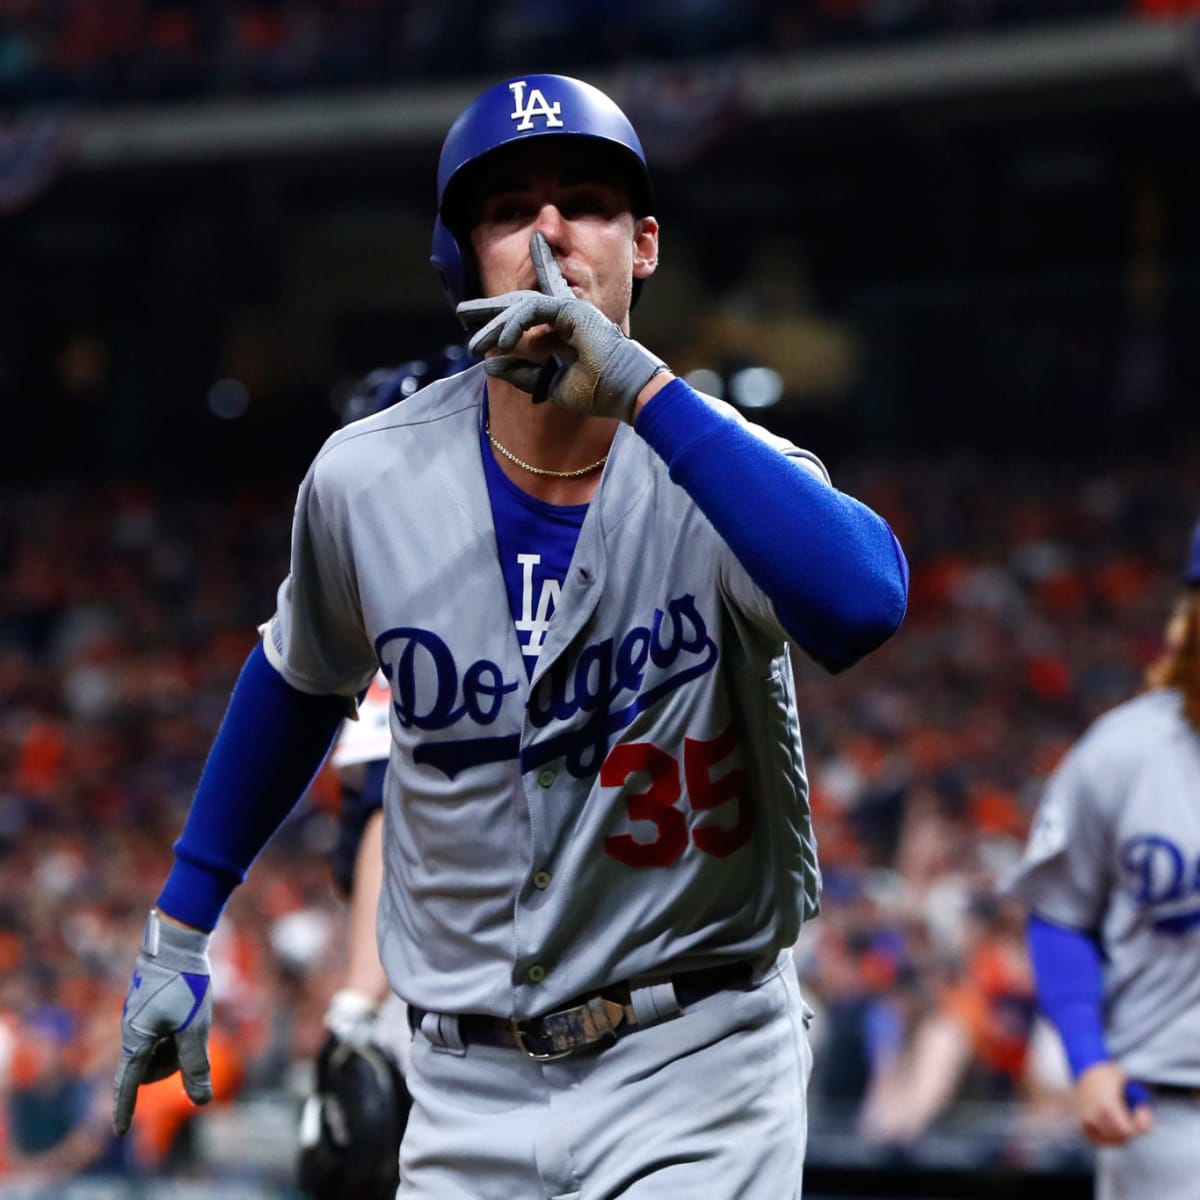 Cody Bellinger reacts to rumor Astros cheated with buzzers - Los